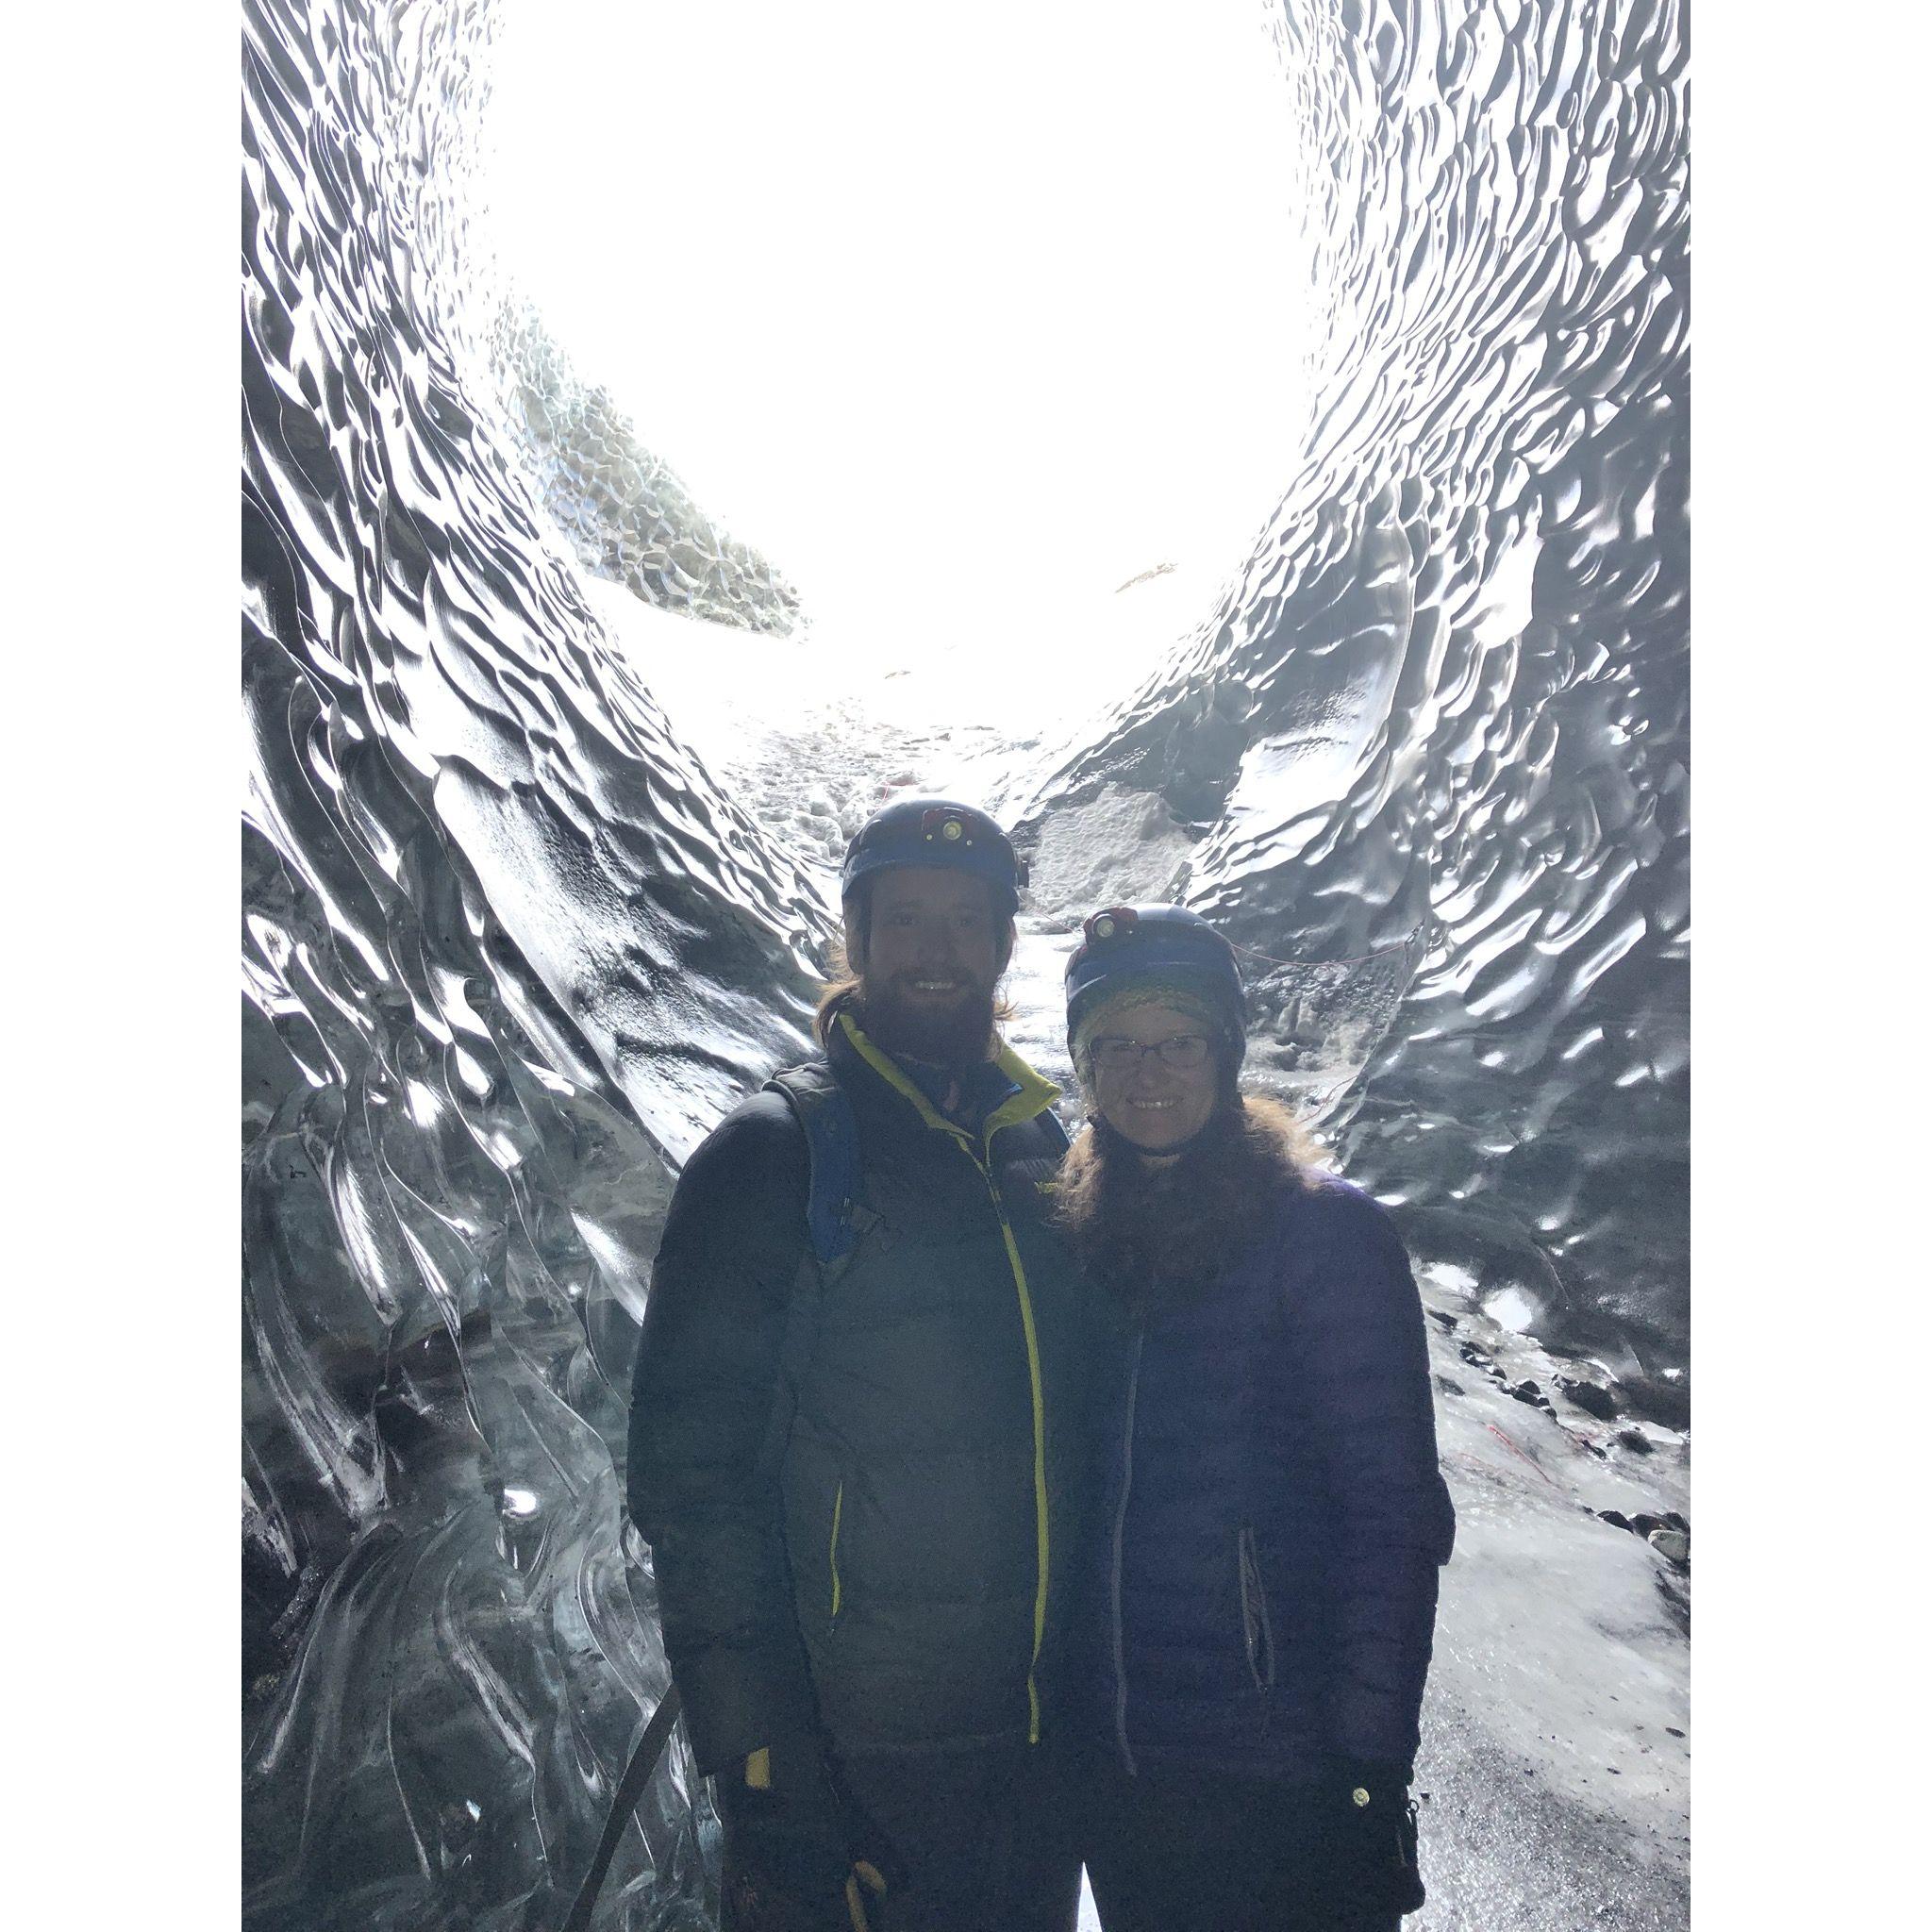 Touring an ice cave in Iceland